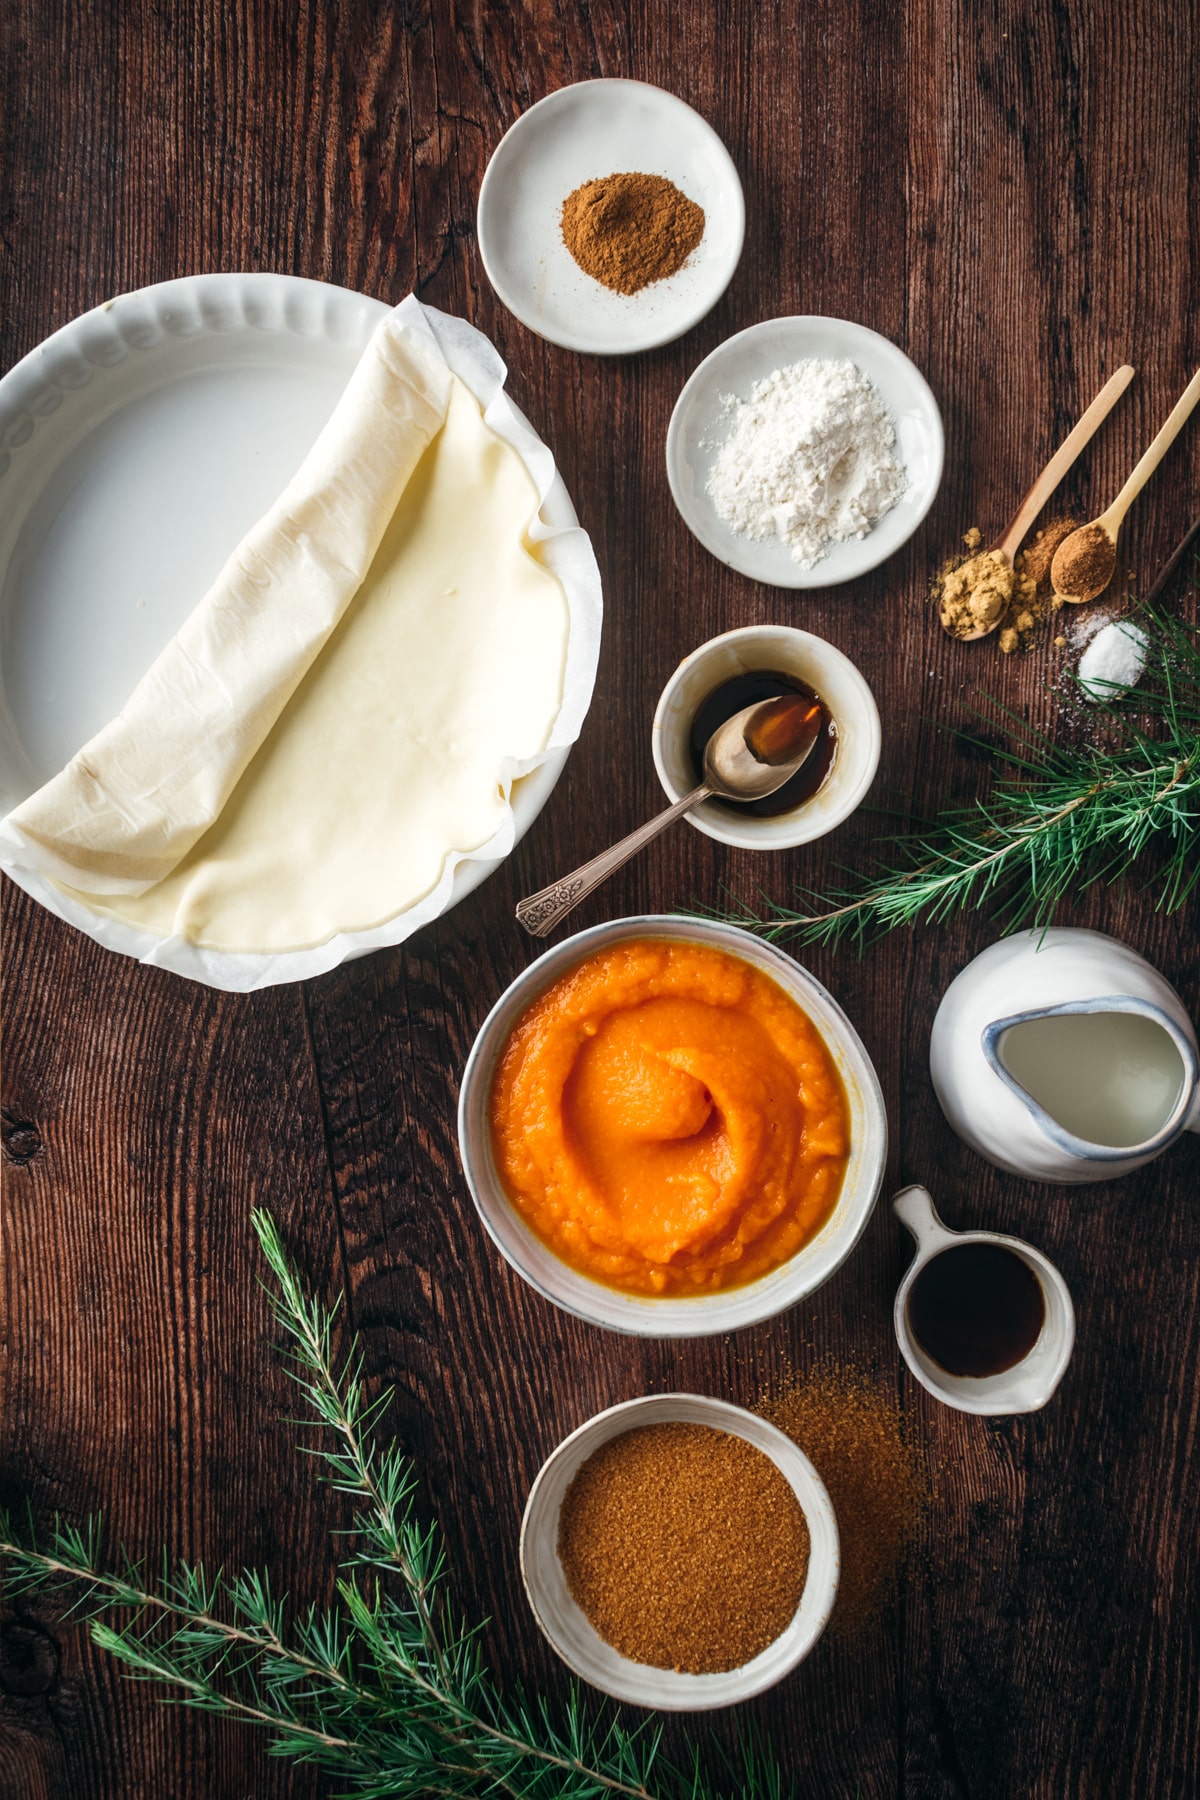 The ingredients for this vegan pumpkin pie recipe including the pie crust and the pie filling ingredients.